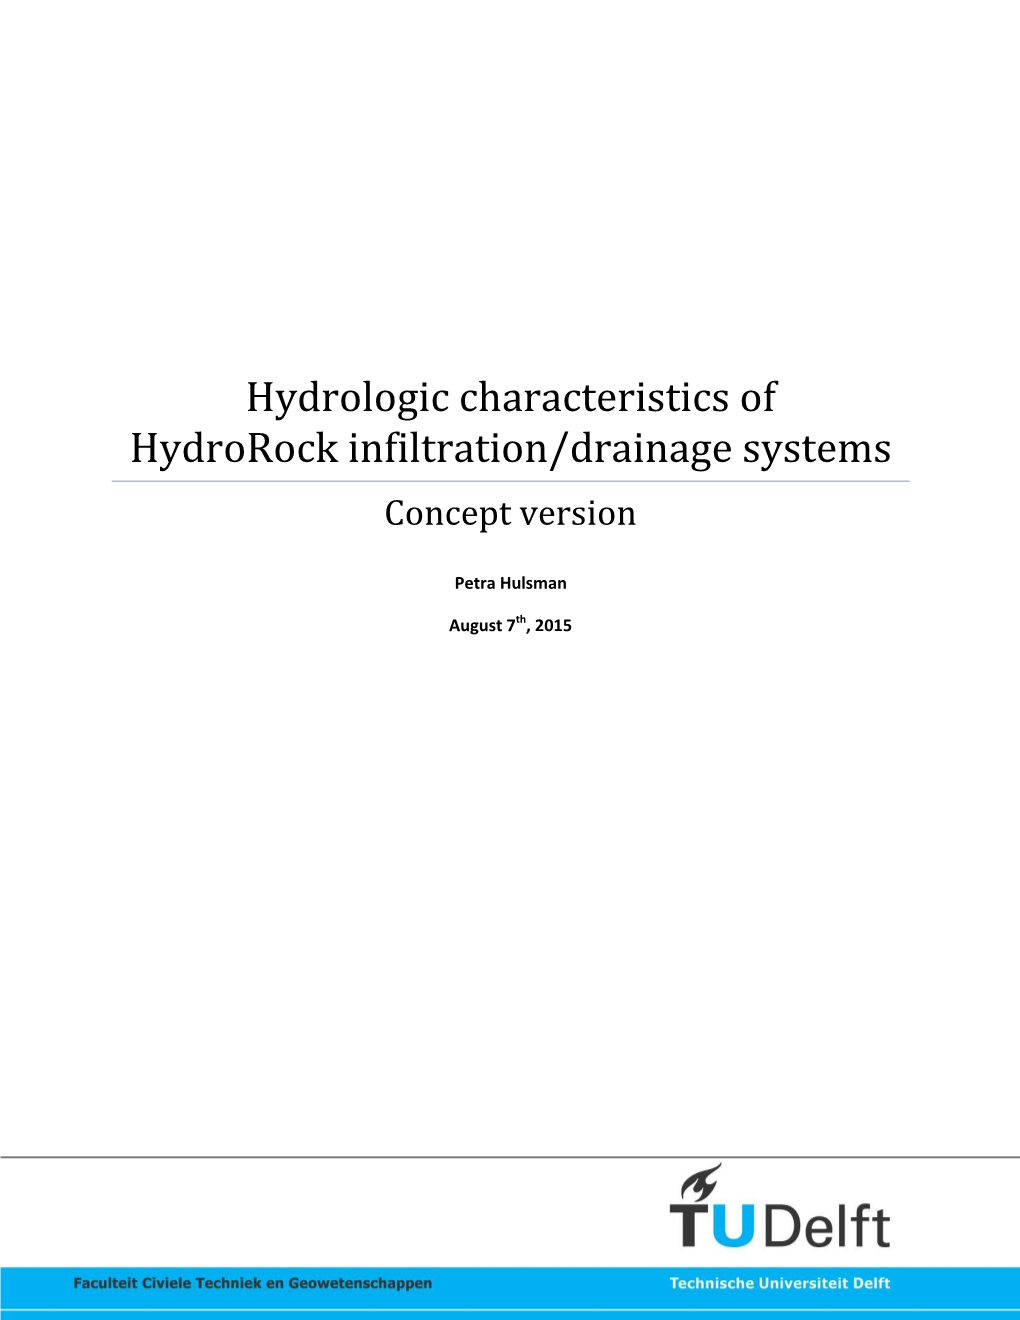 Hydrologic Characteristics of Hydrorock Infiltration/Drainage Systems Concept Version